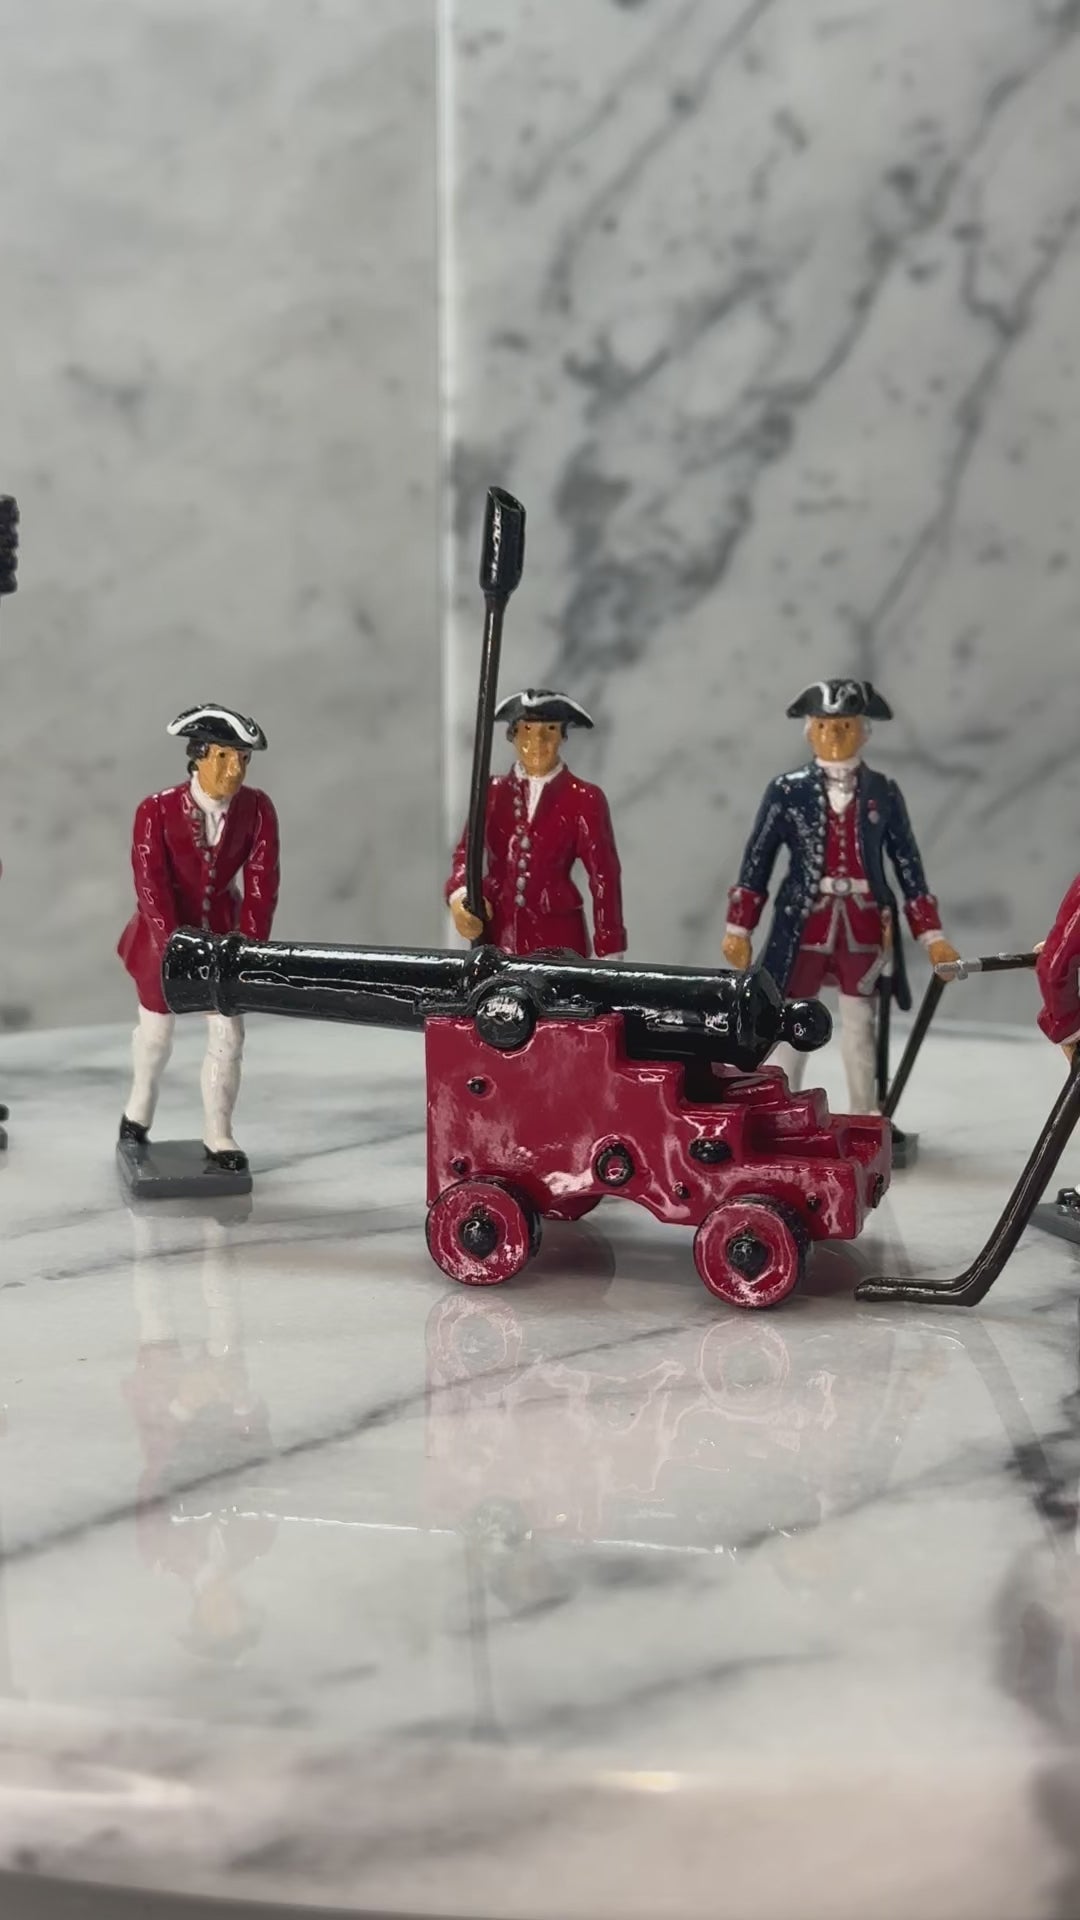 360 degree view of toy soldier set French Colonial Artillery.